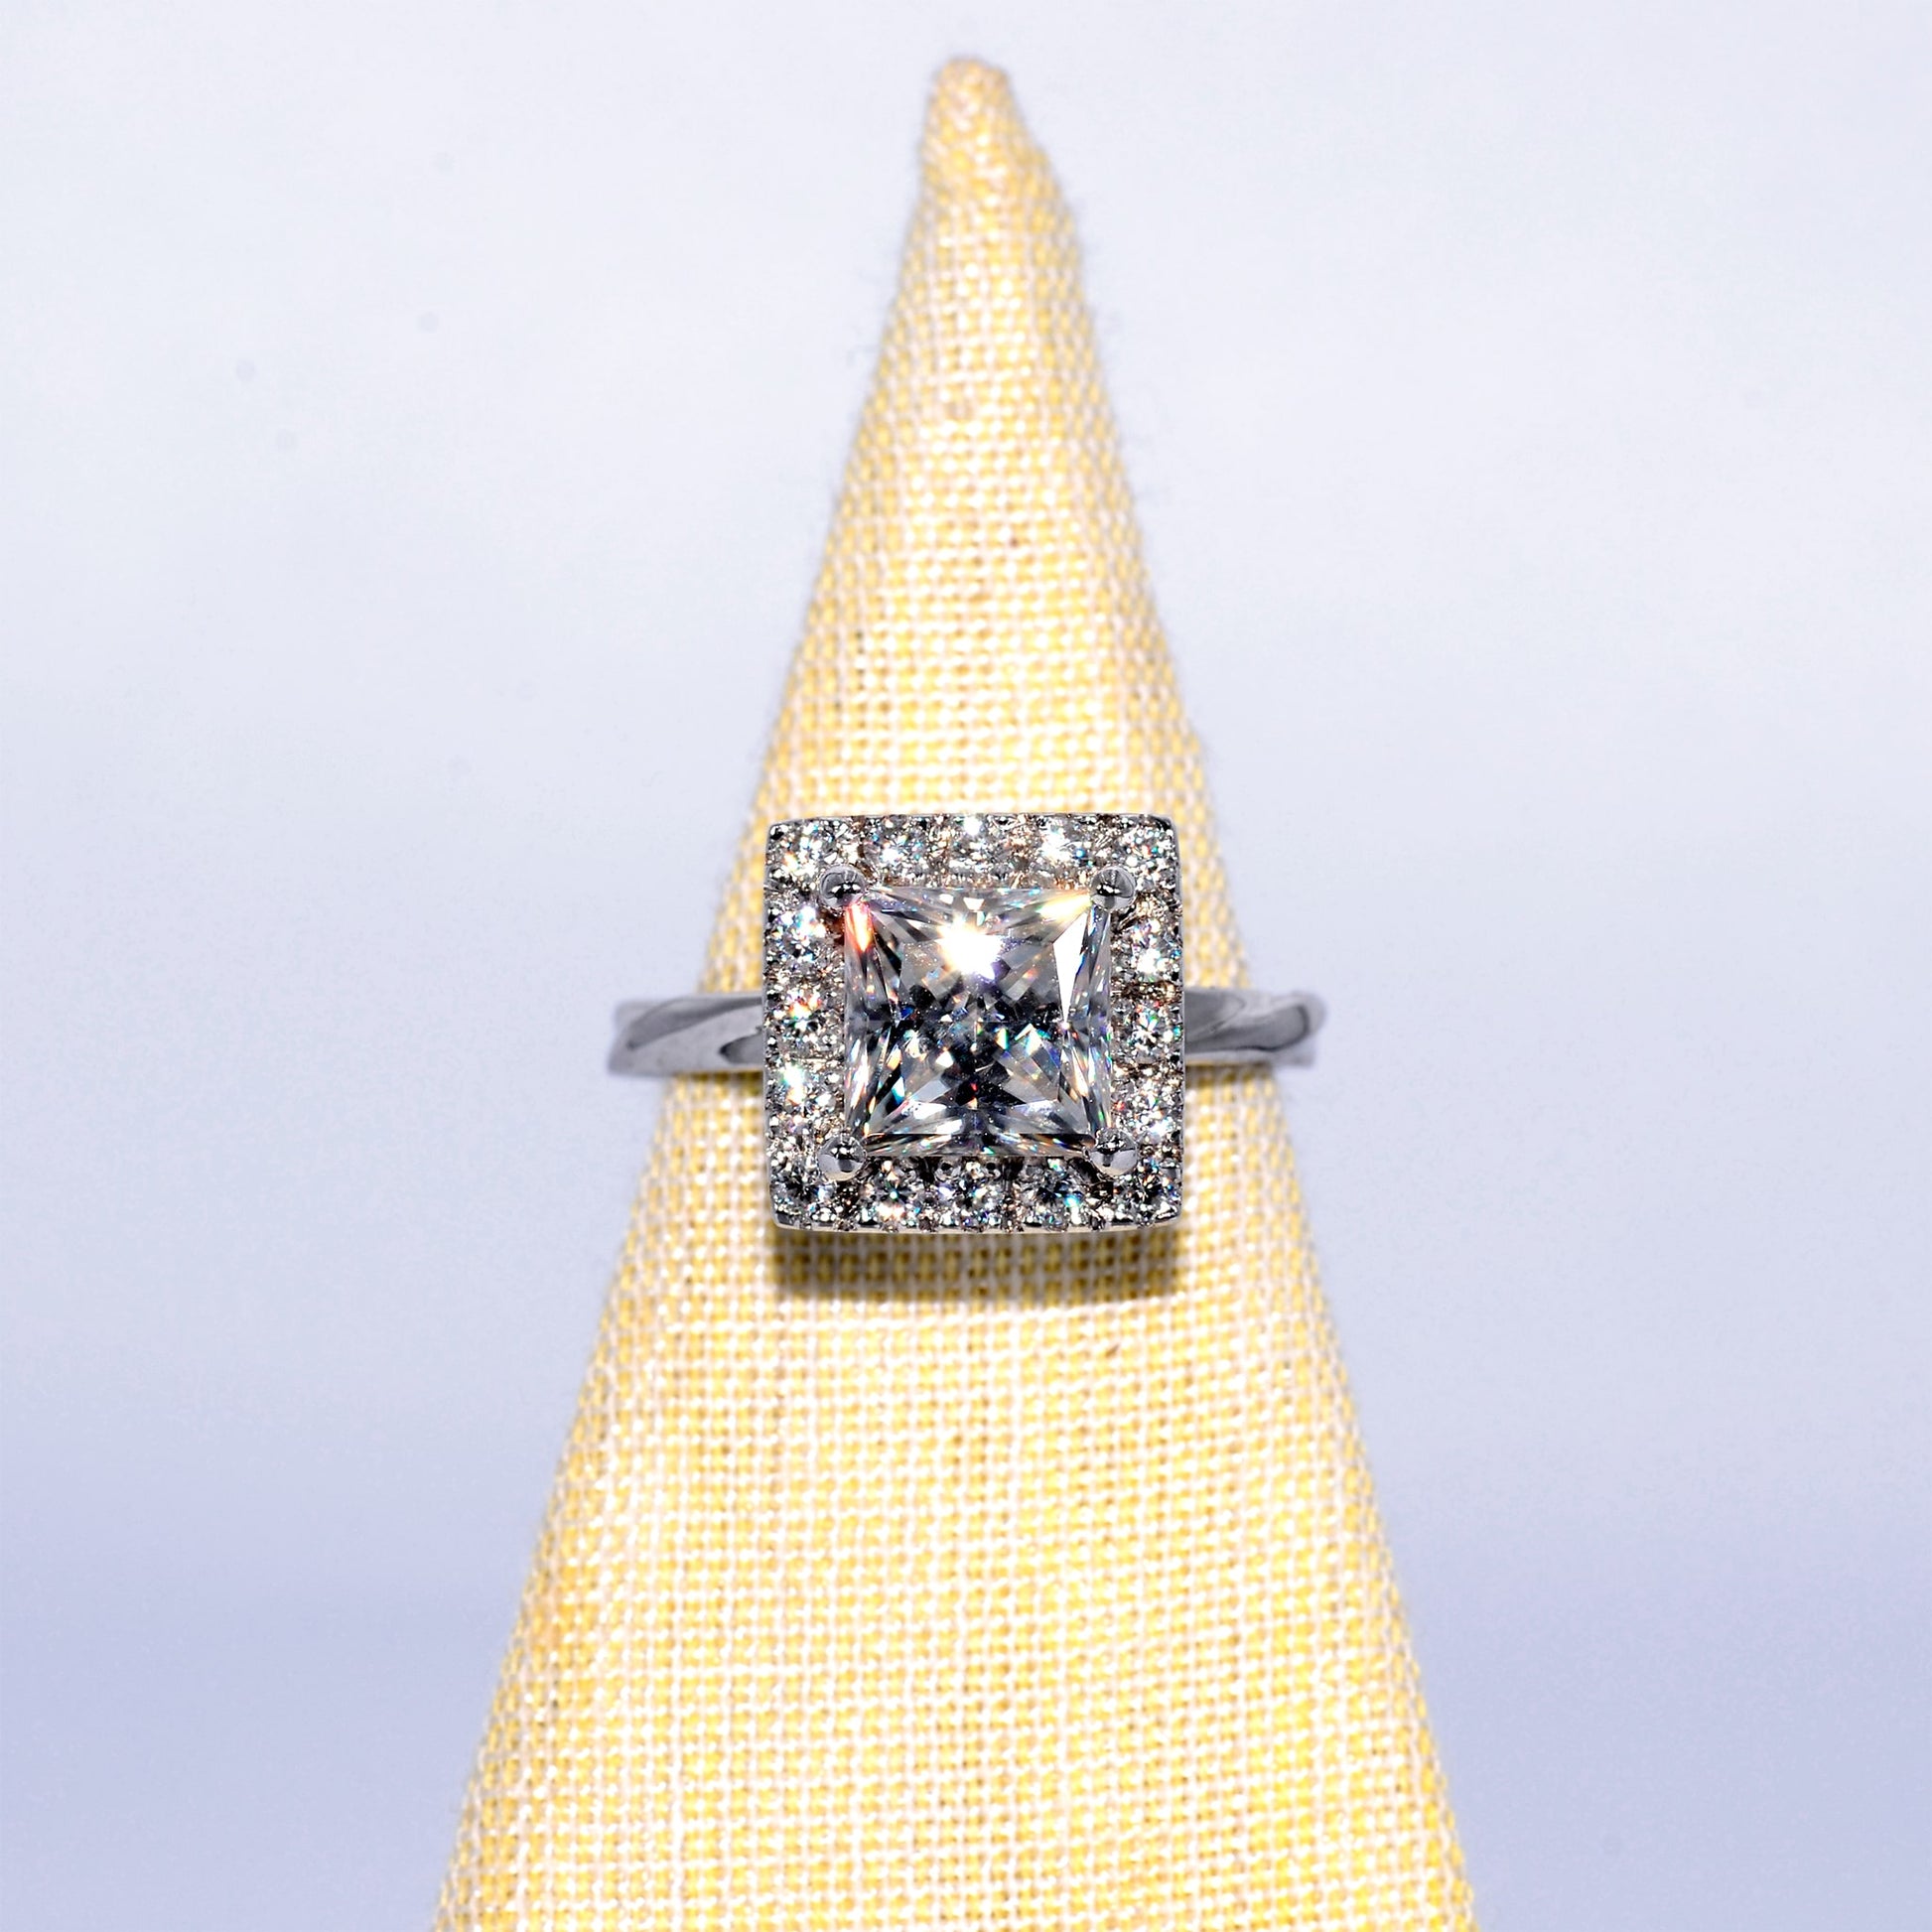 One-of-a-kind engagement ring in 18K white gold and moissanites